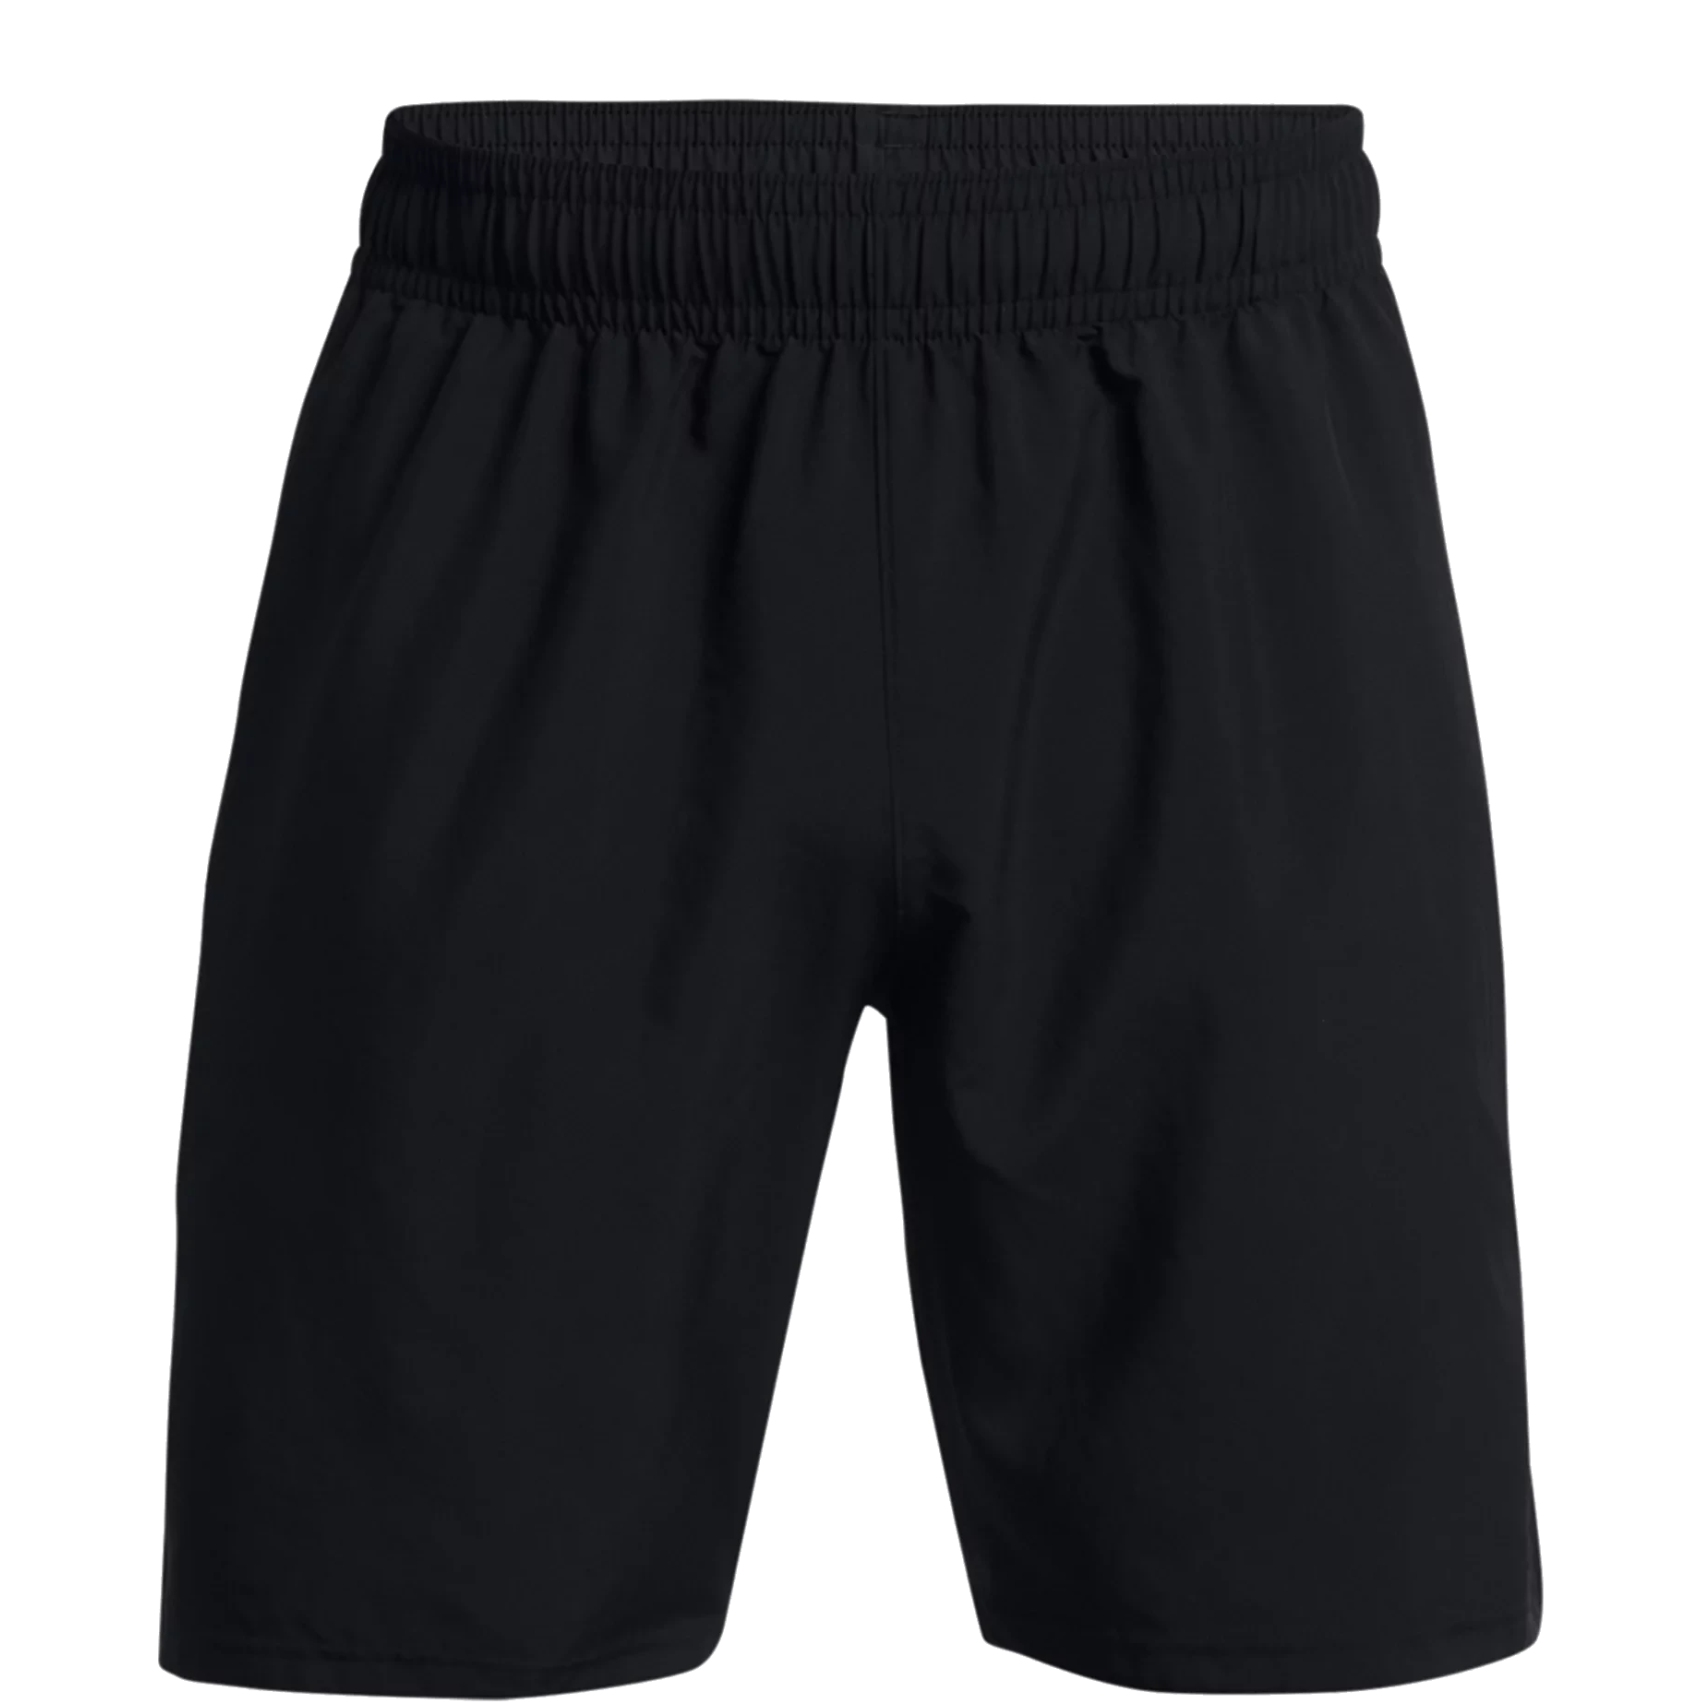 Picture of Under Armour UA Woven Wordmark Shorts Men - Black/White